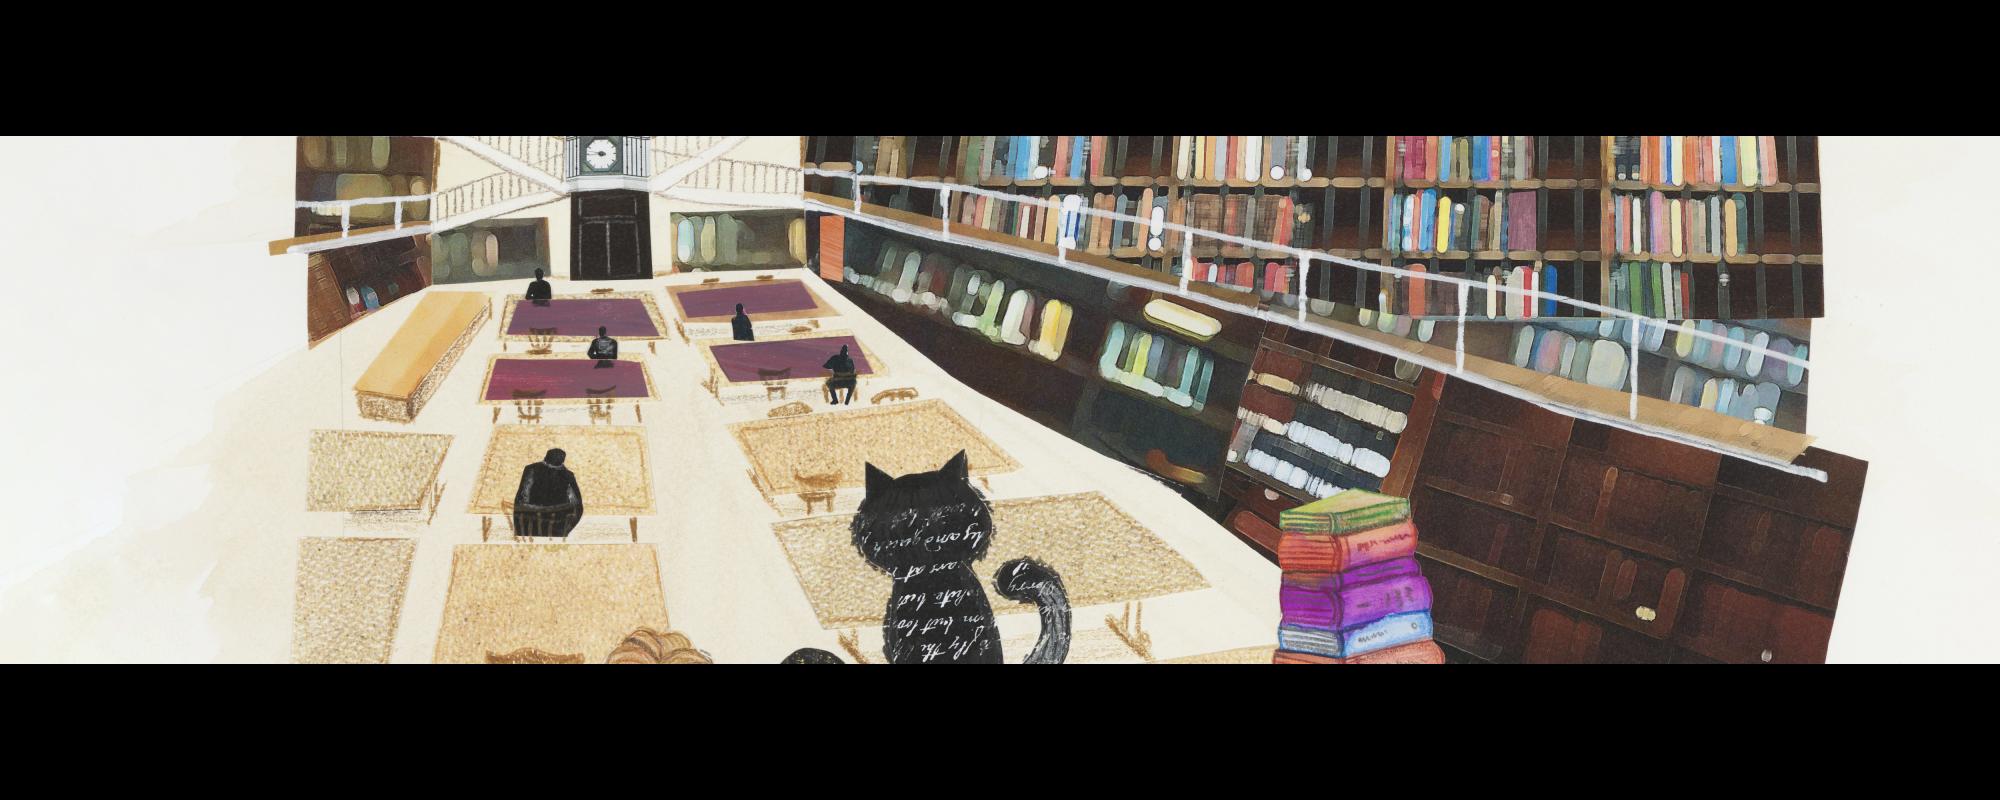 A cat looks across a large room full of tables with books on the walls